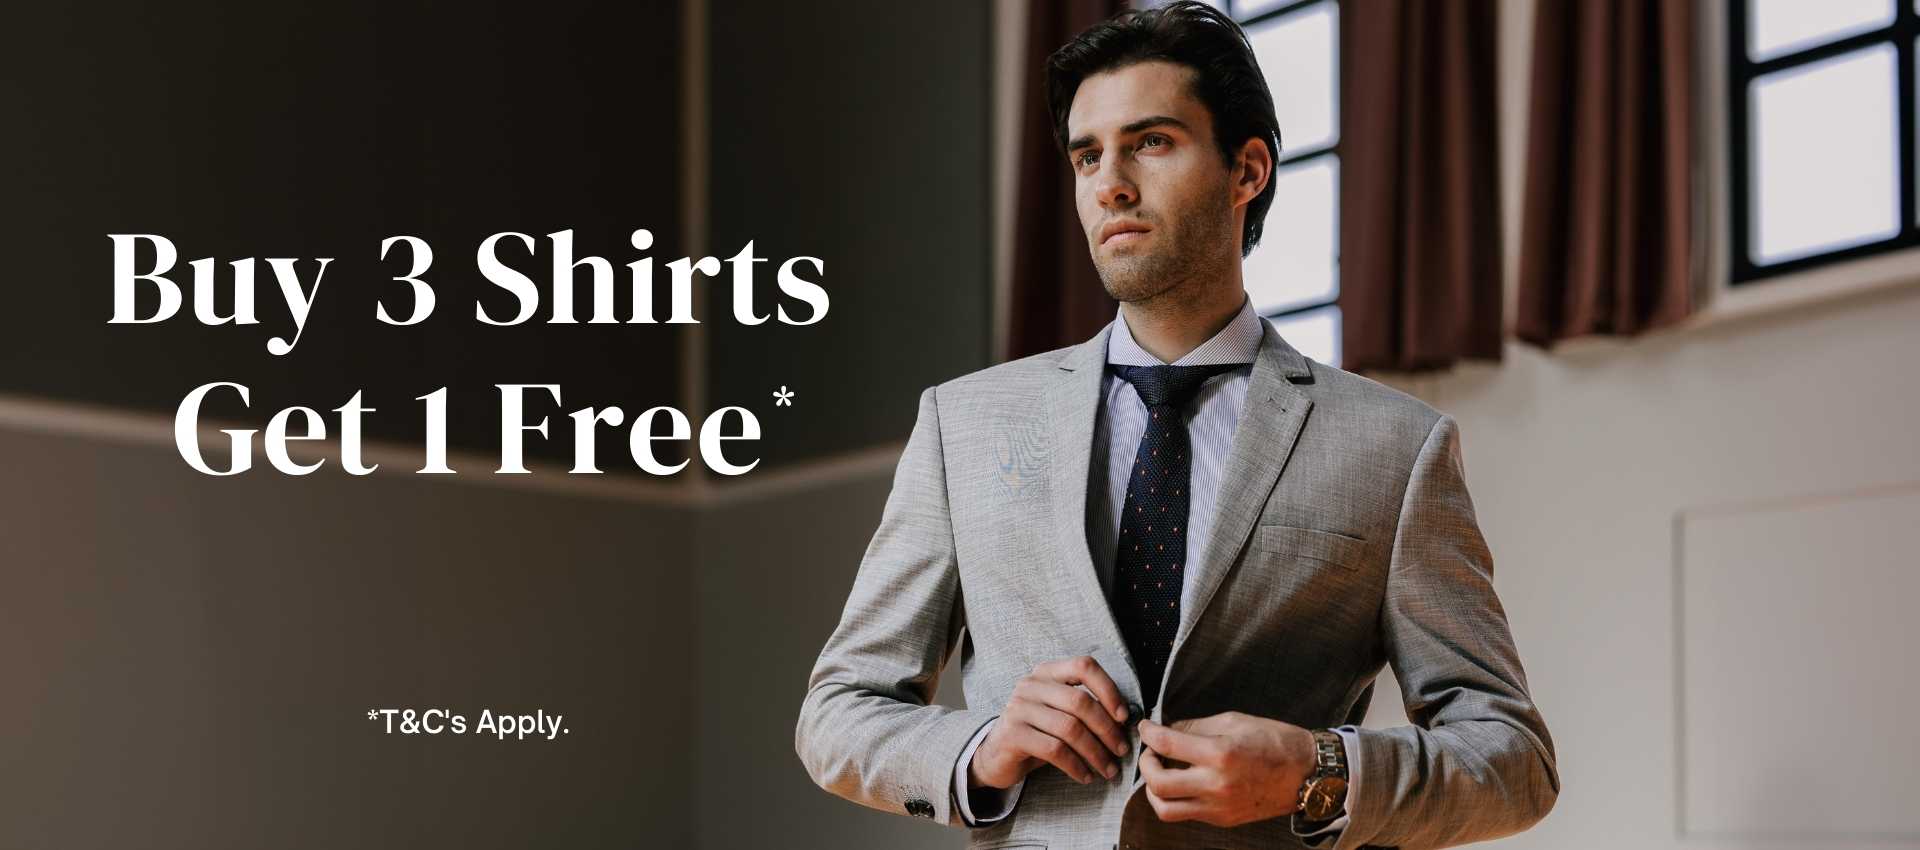 Collection of High Quality and Premium Cotton Dress Shirts for Men from Dandy & Son. Image of a man wearing a Extreme Cutaway Collar Shirt from Dandy & Son. Buy 3 Shirts, get 1 Free.